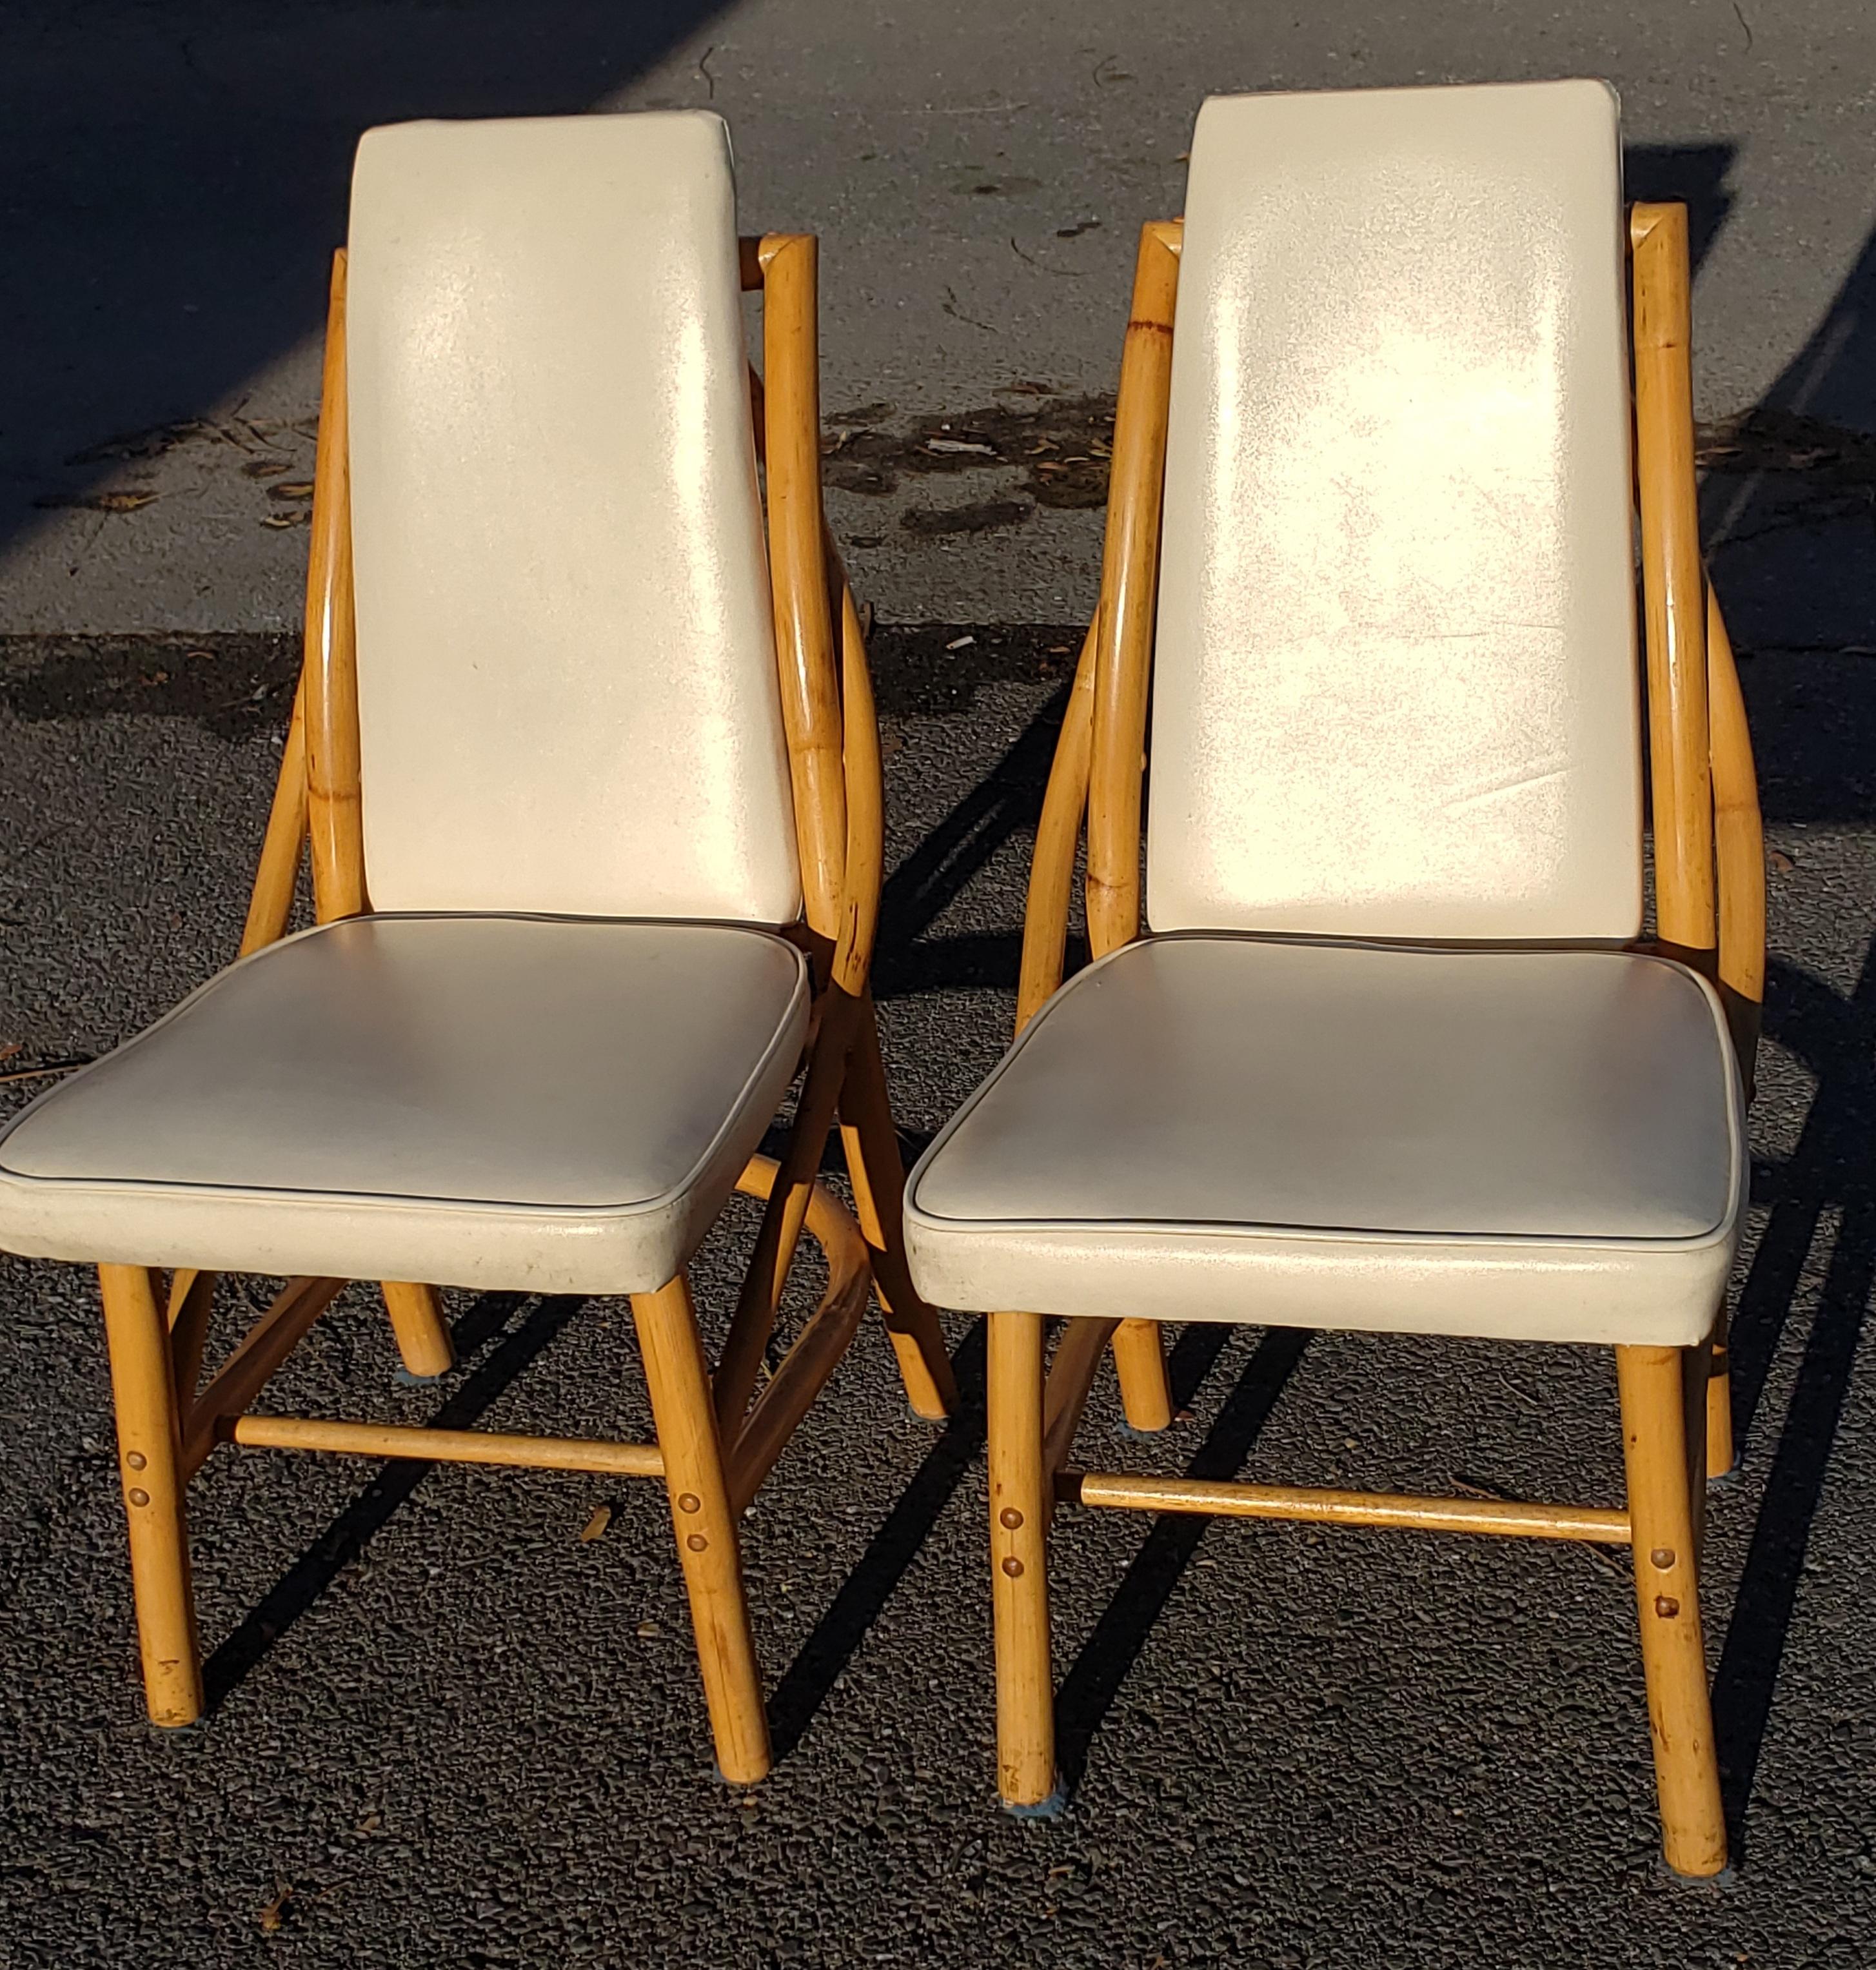 Bam Tan Rattan Bamboo Dining Chairs, Circa 1960s For Sale 2